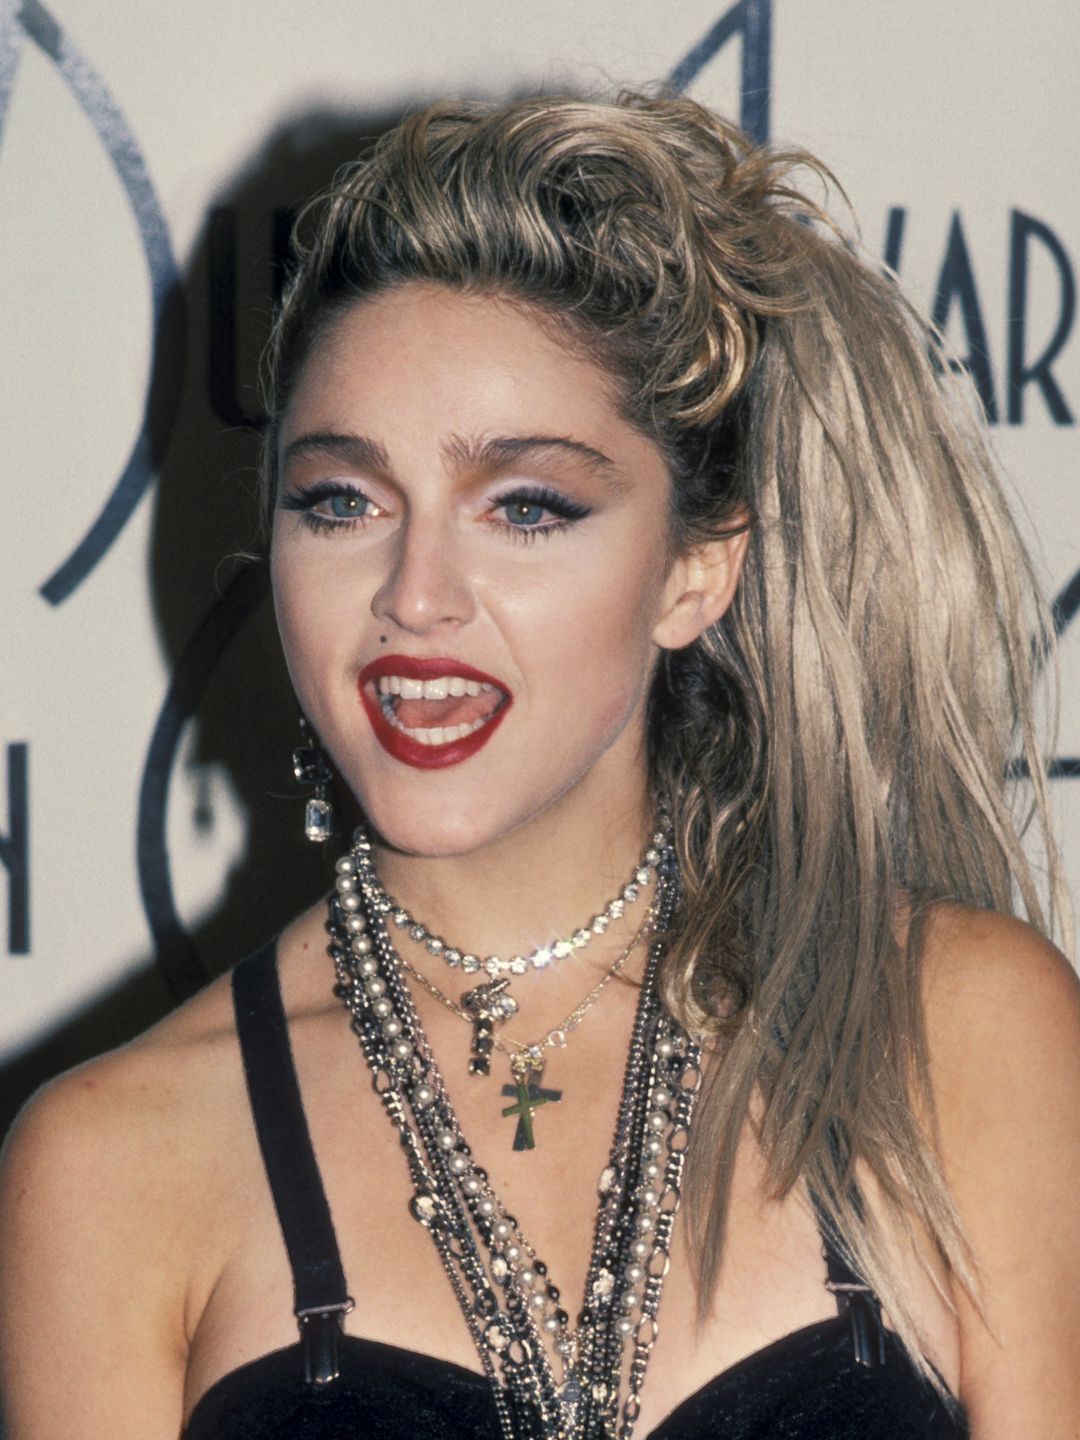 Madonna with big hair at the American Music Awards 